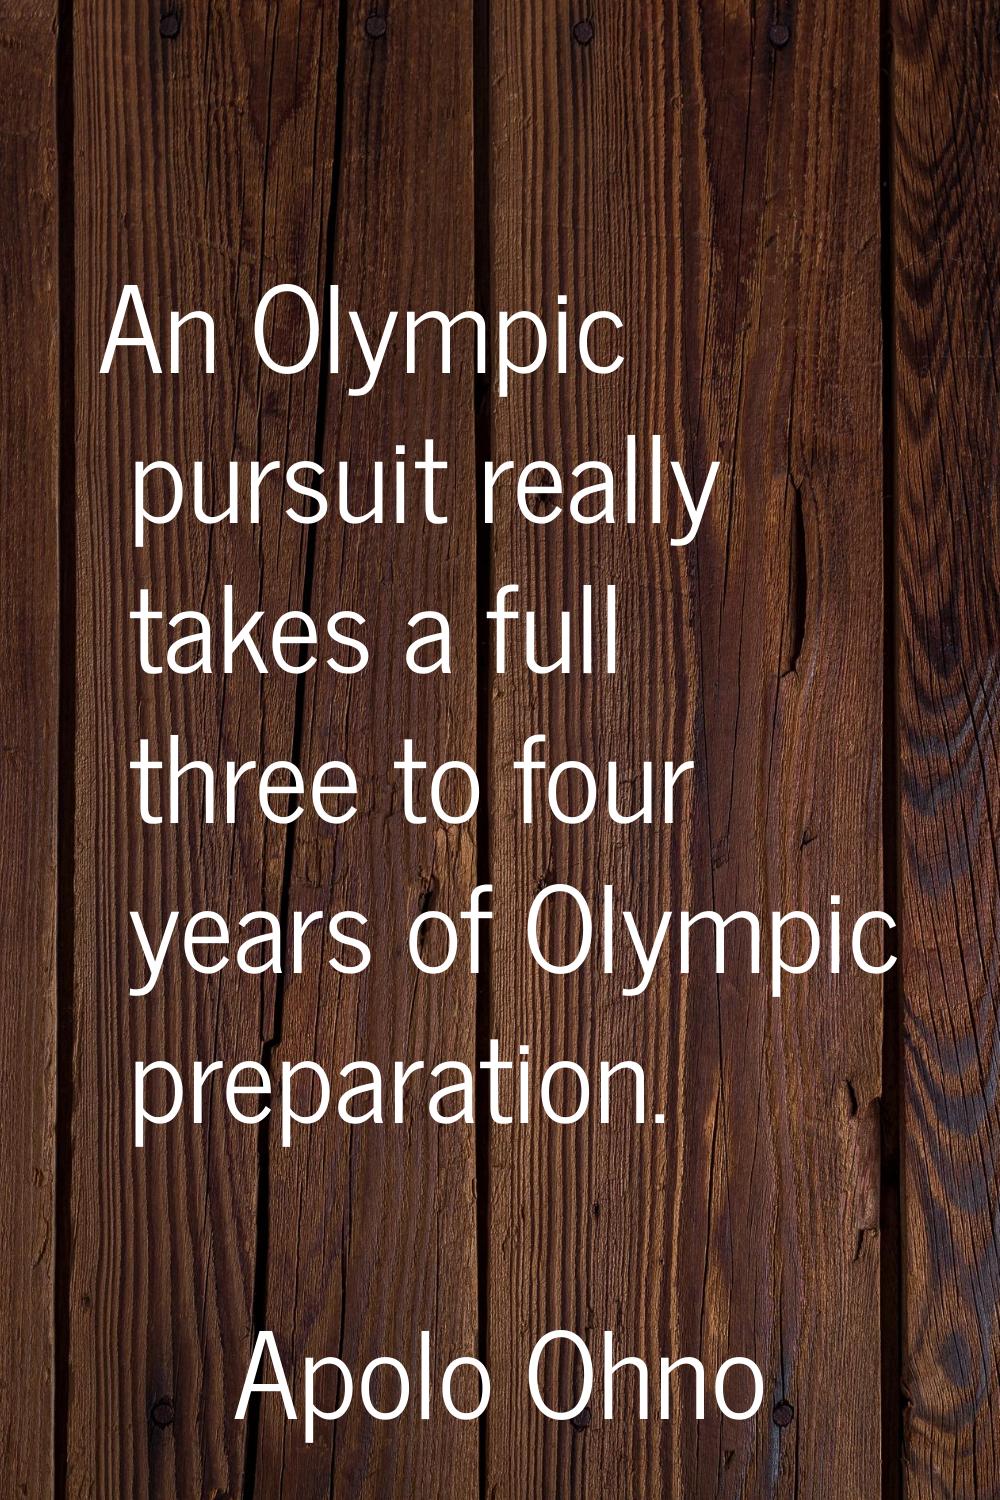 An Olympic pursuit really takes a full three to four years of Olympic preparation.